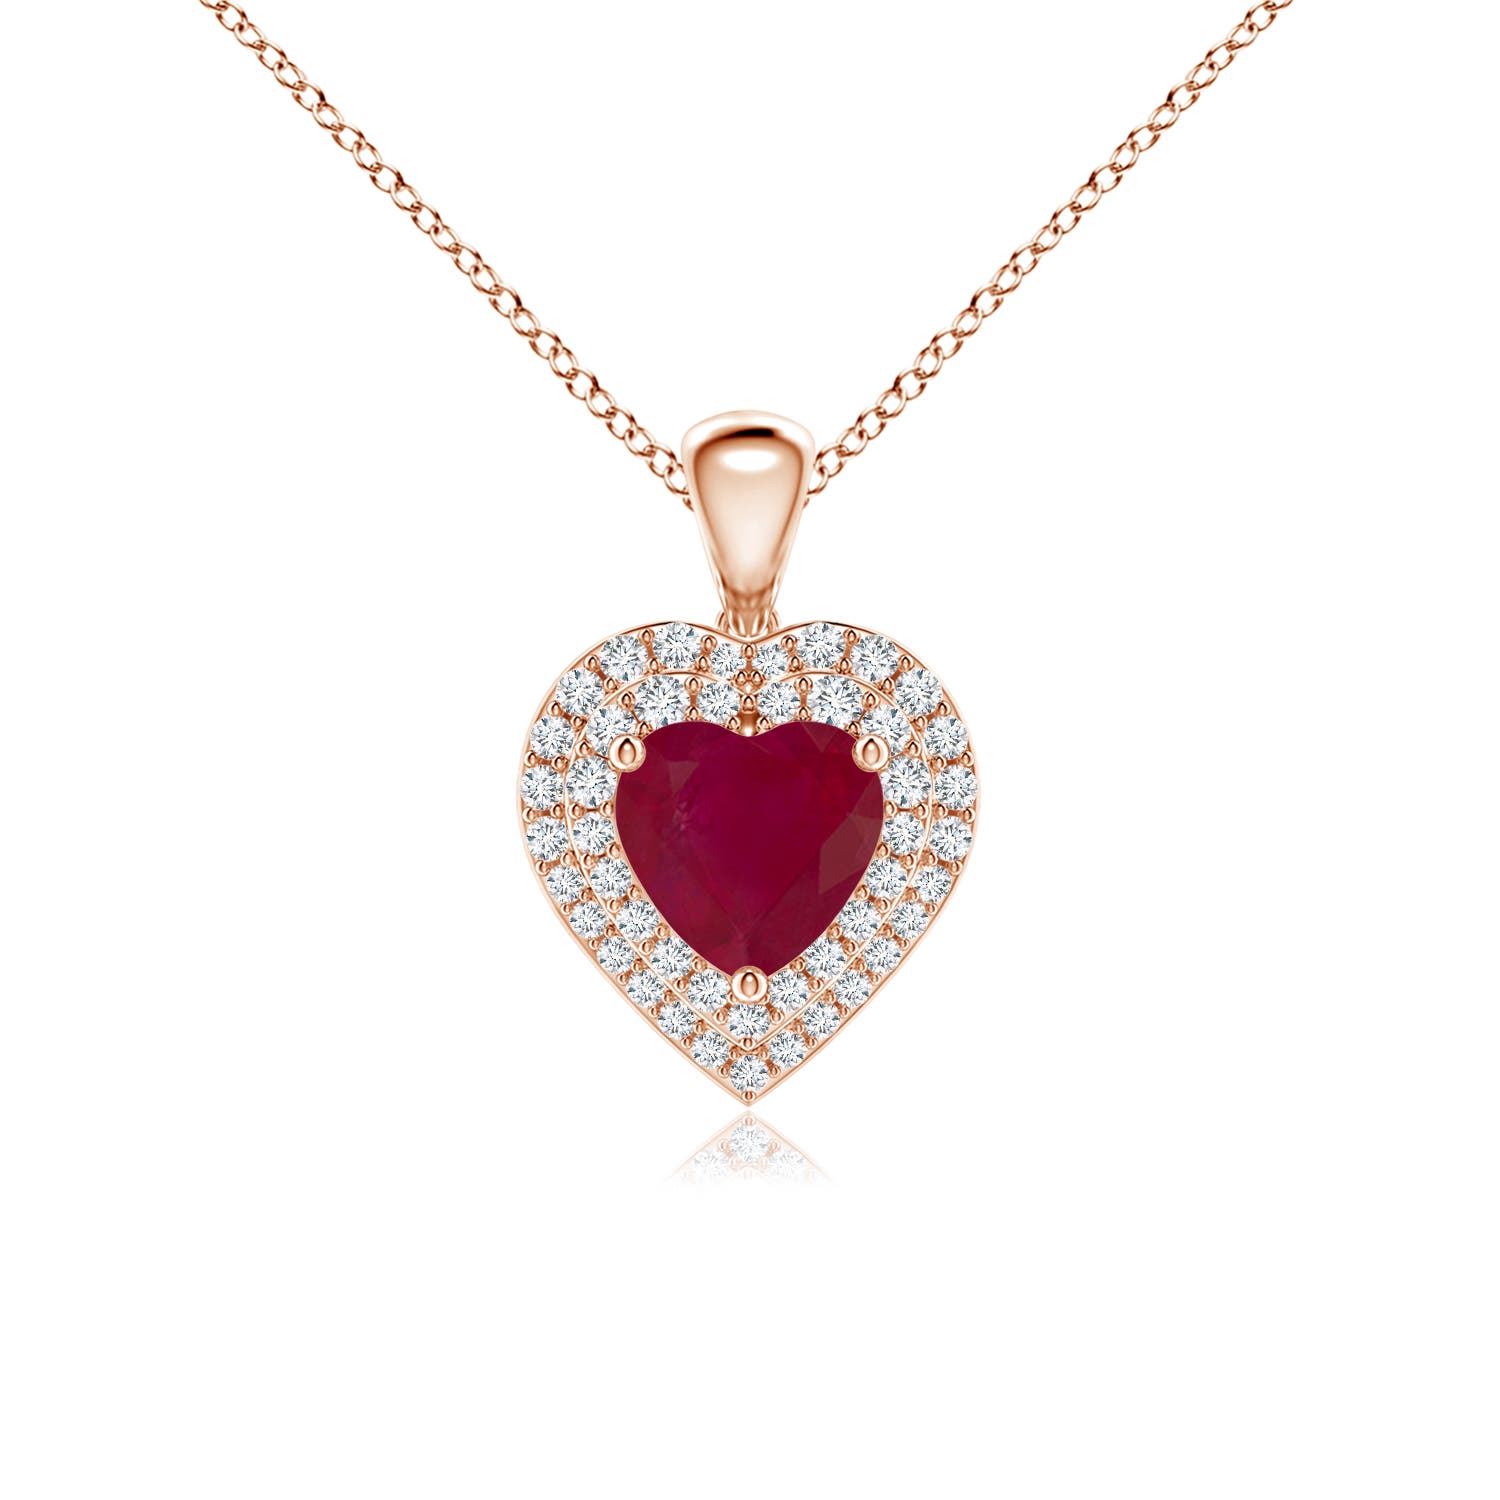 A - Ruby / 1.25 CT / 14 KT Rose Gold